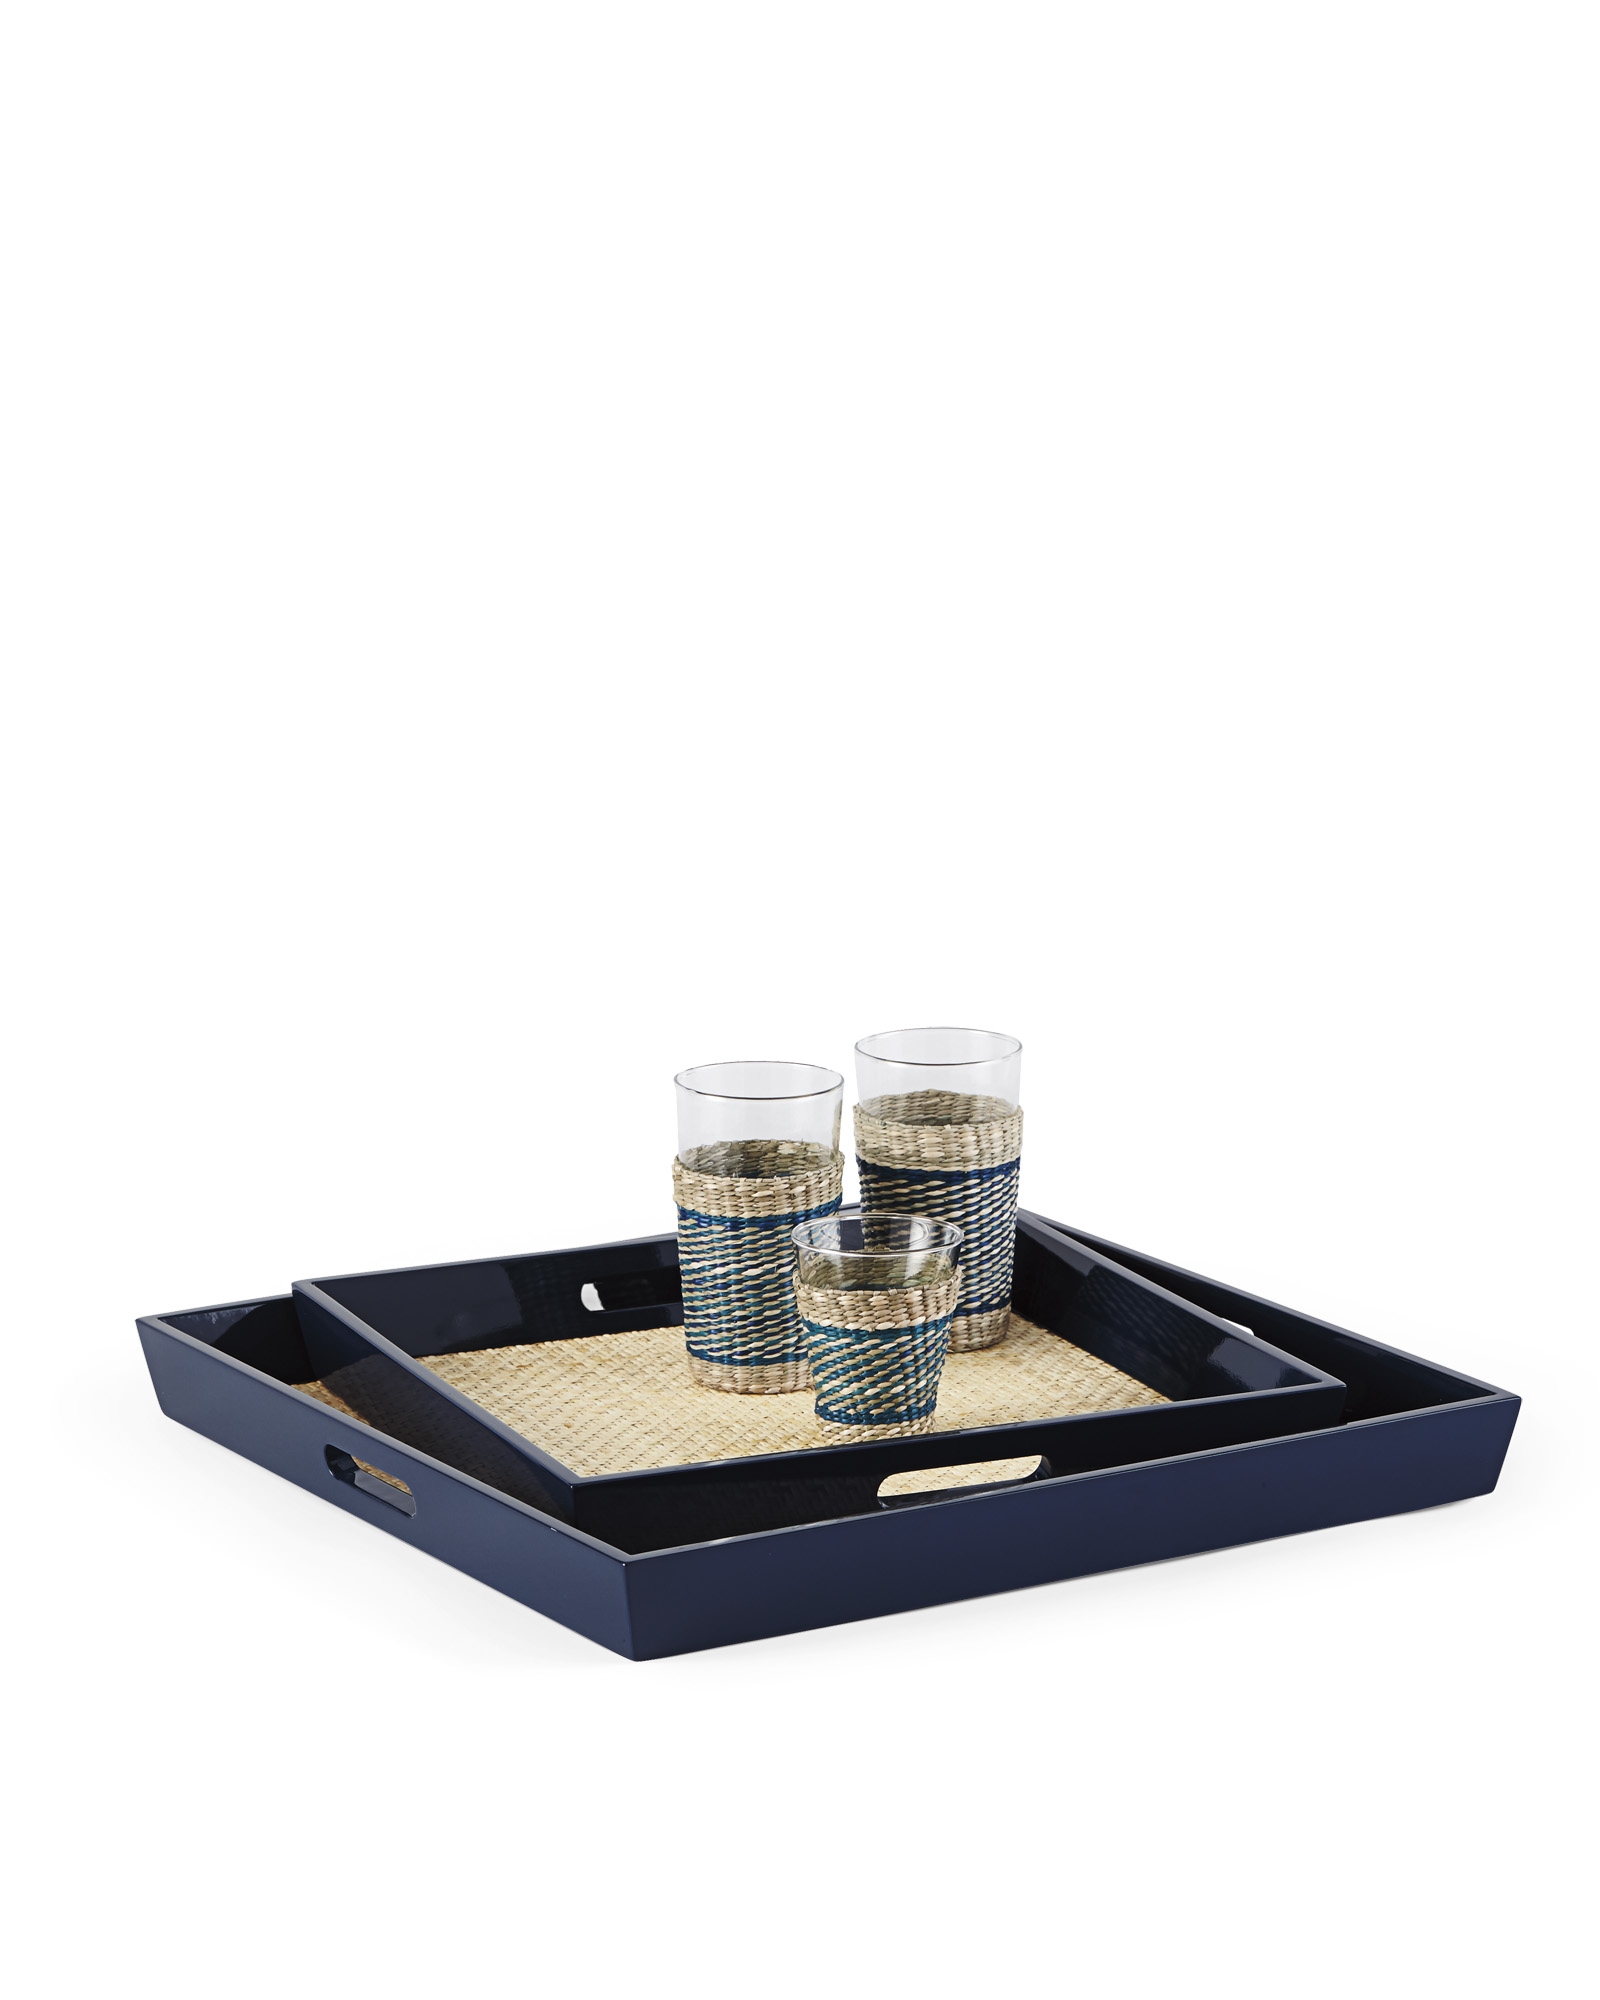 Lacquer Rattan Tray - Navy - 20" Sq - Image 1